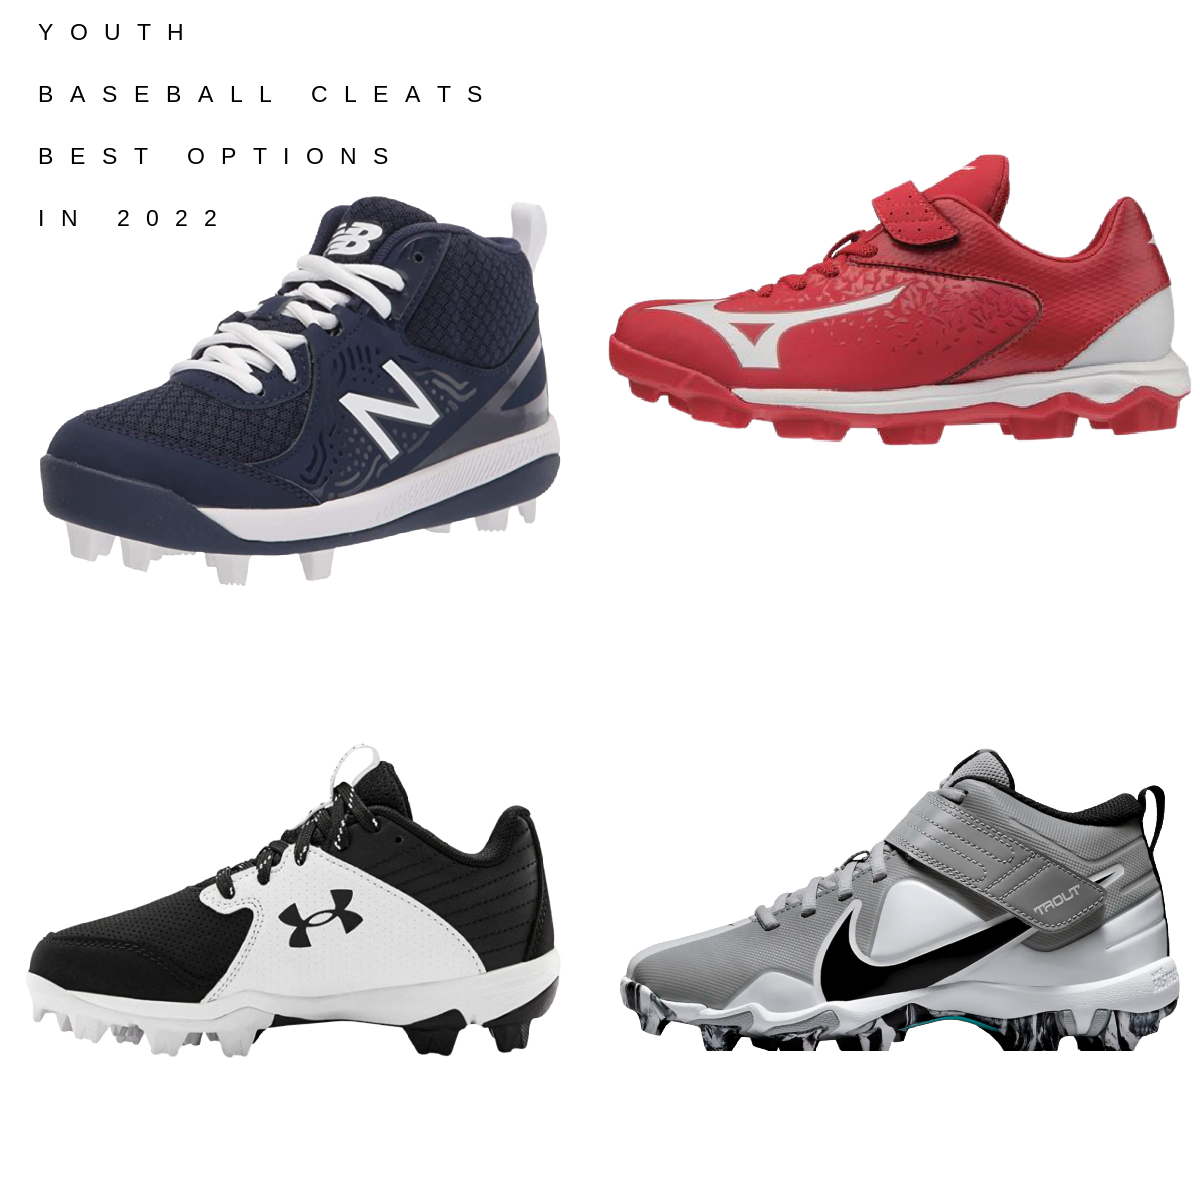 Youth Baseball Cleats: The Best Options in 2022